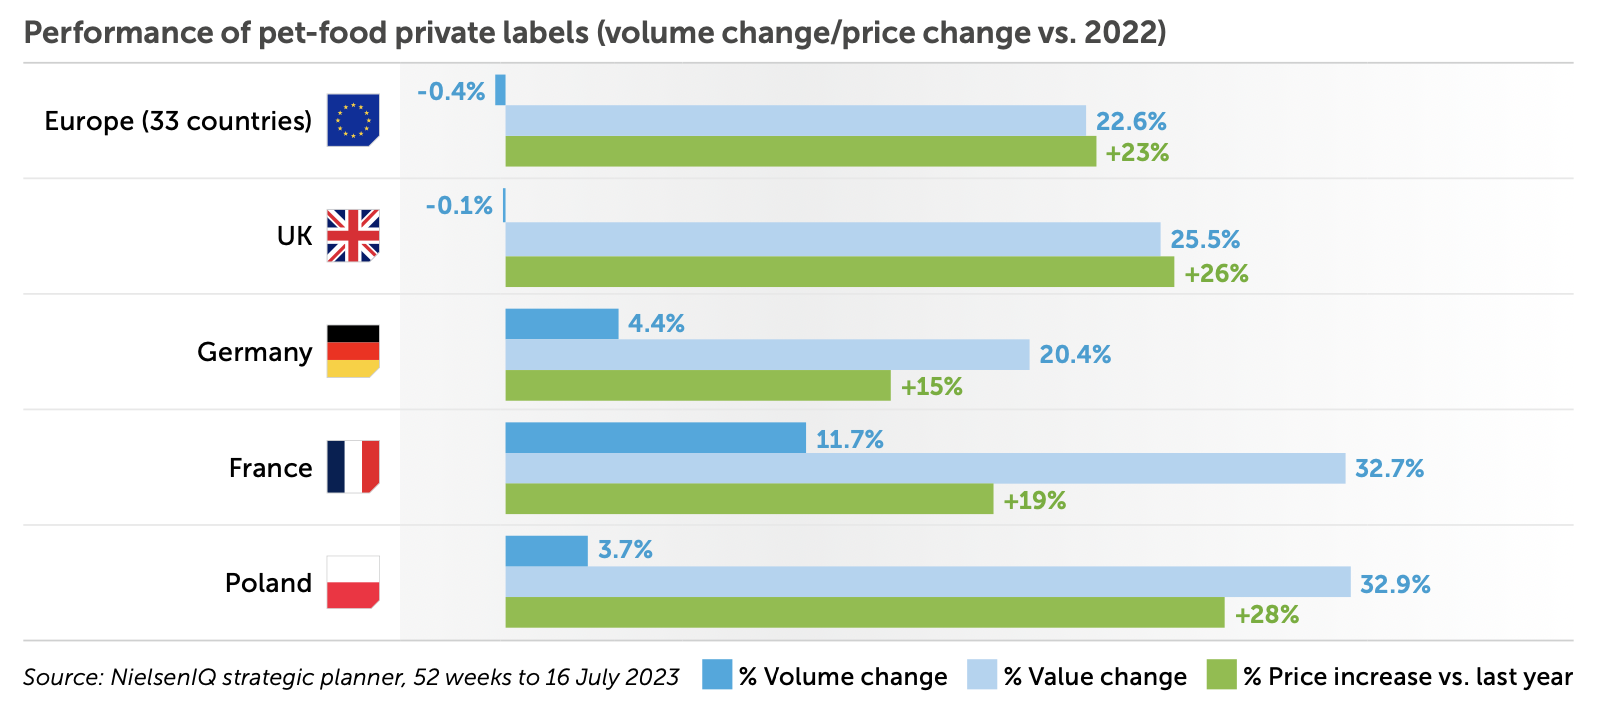 Performance of pet-food private labels (volume change/price change vs. 2022)